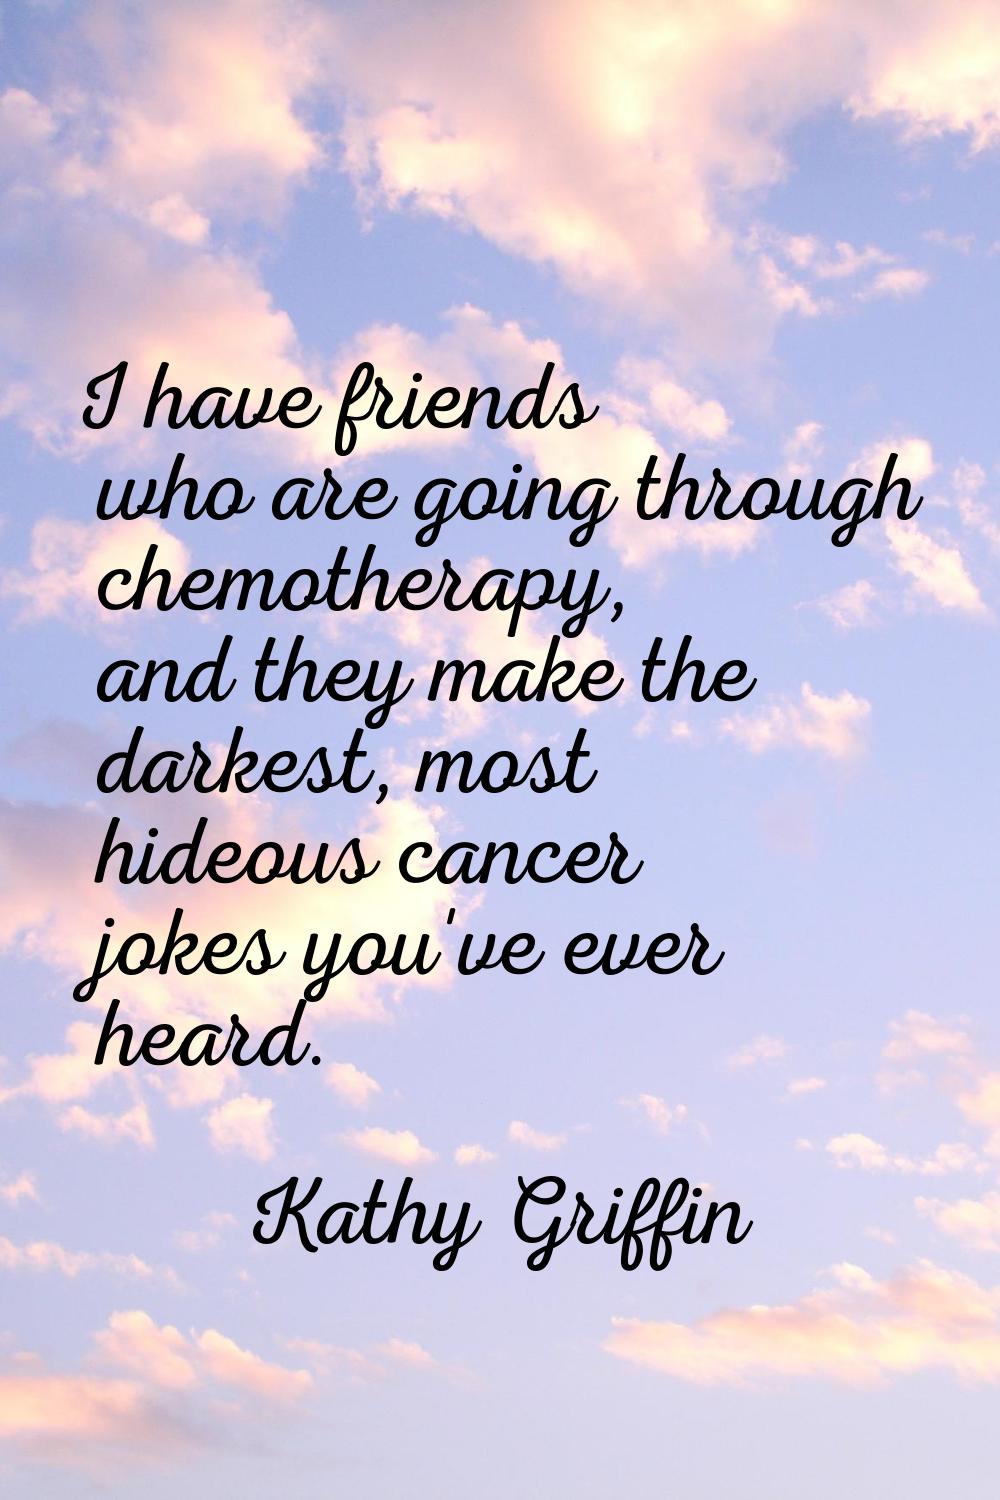 I have friends who are going through chemotherapy, and they make the darkest, most hideous cancer j